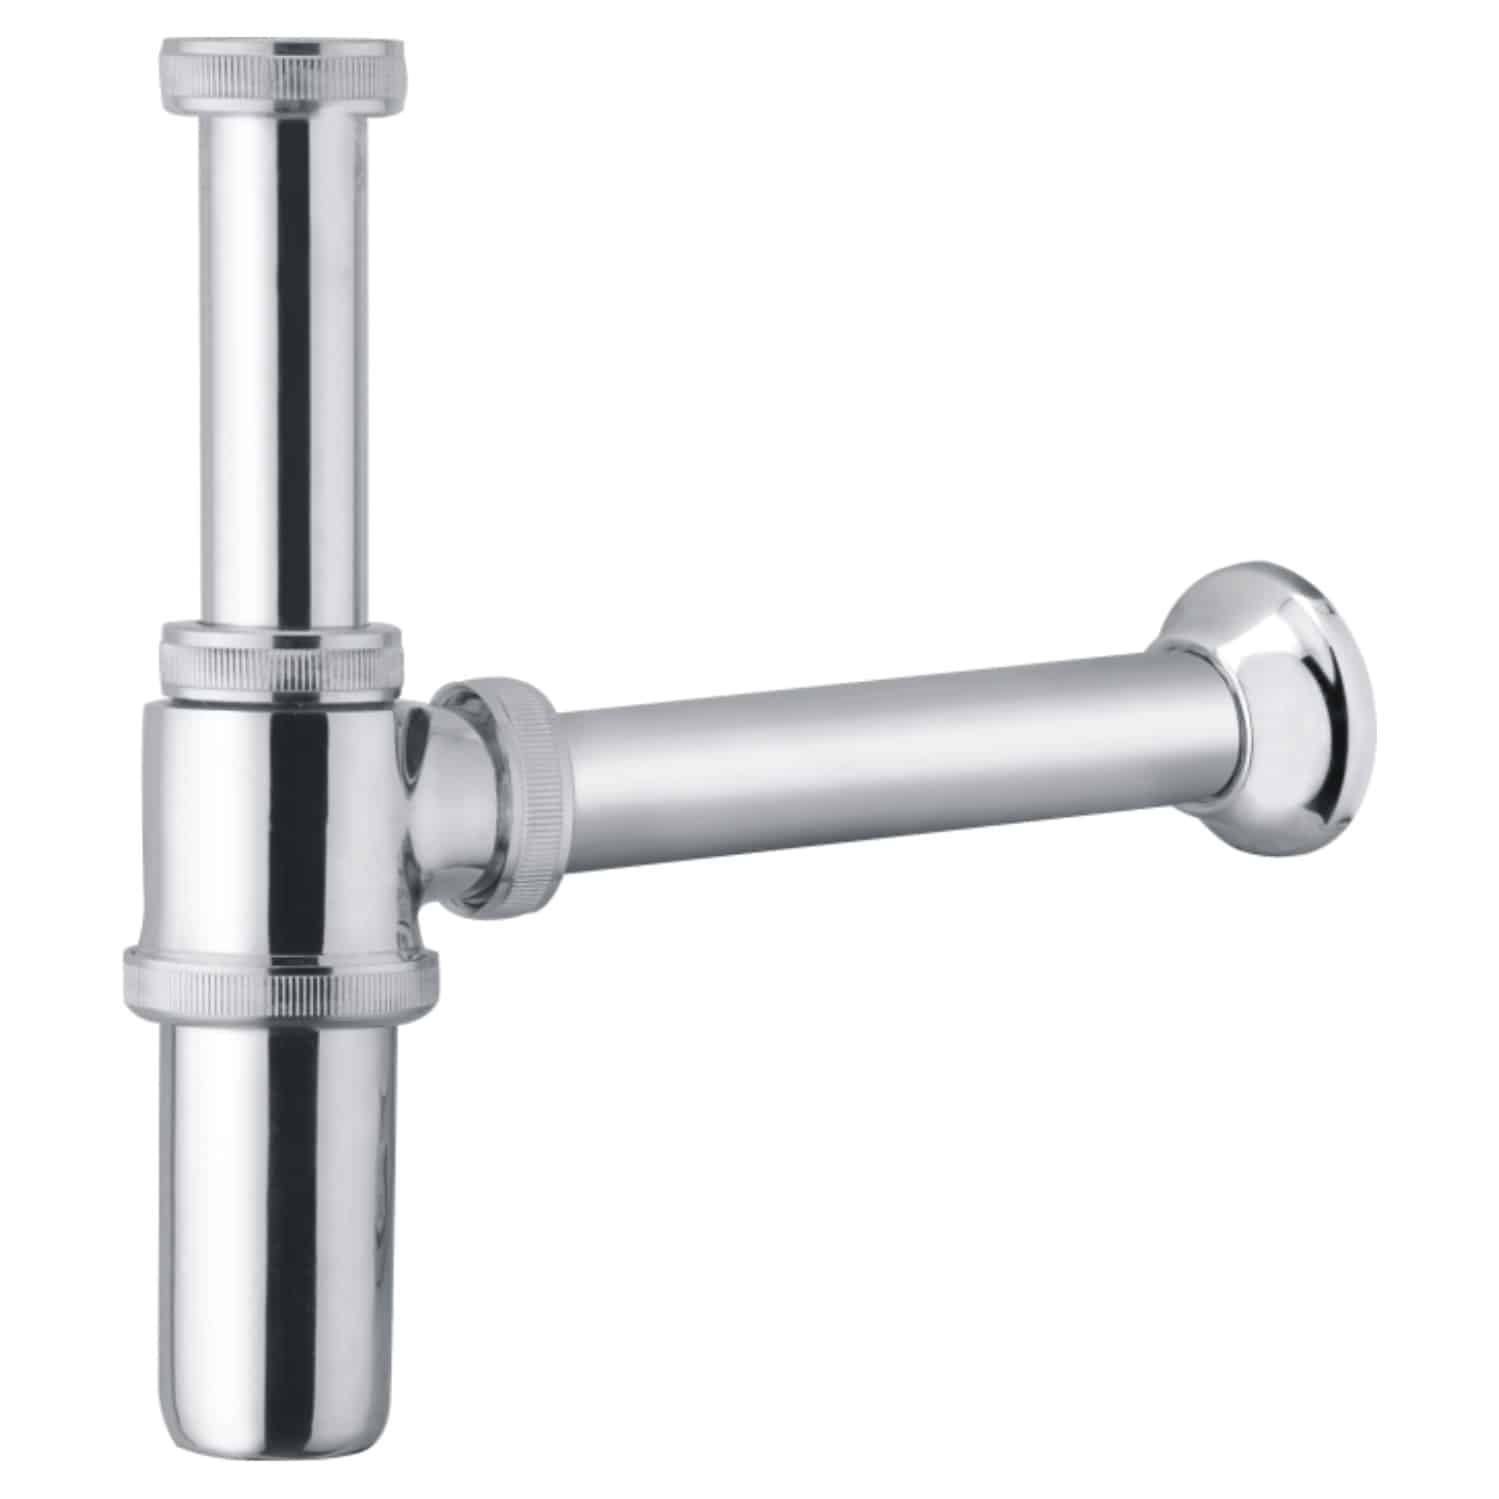 Goeka bottle trap pipe for kitchen sink and bathroom wash basin at the best price